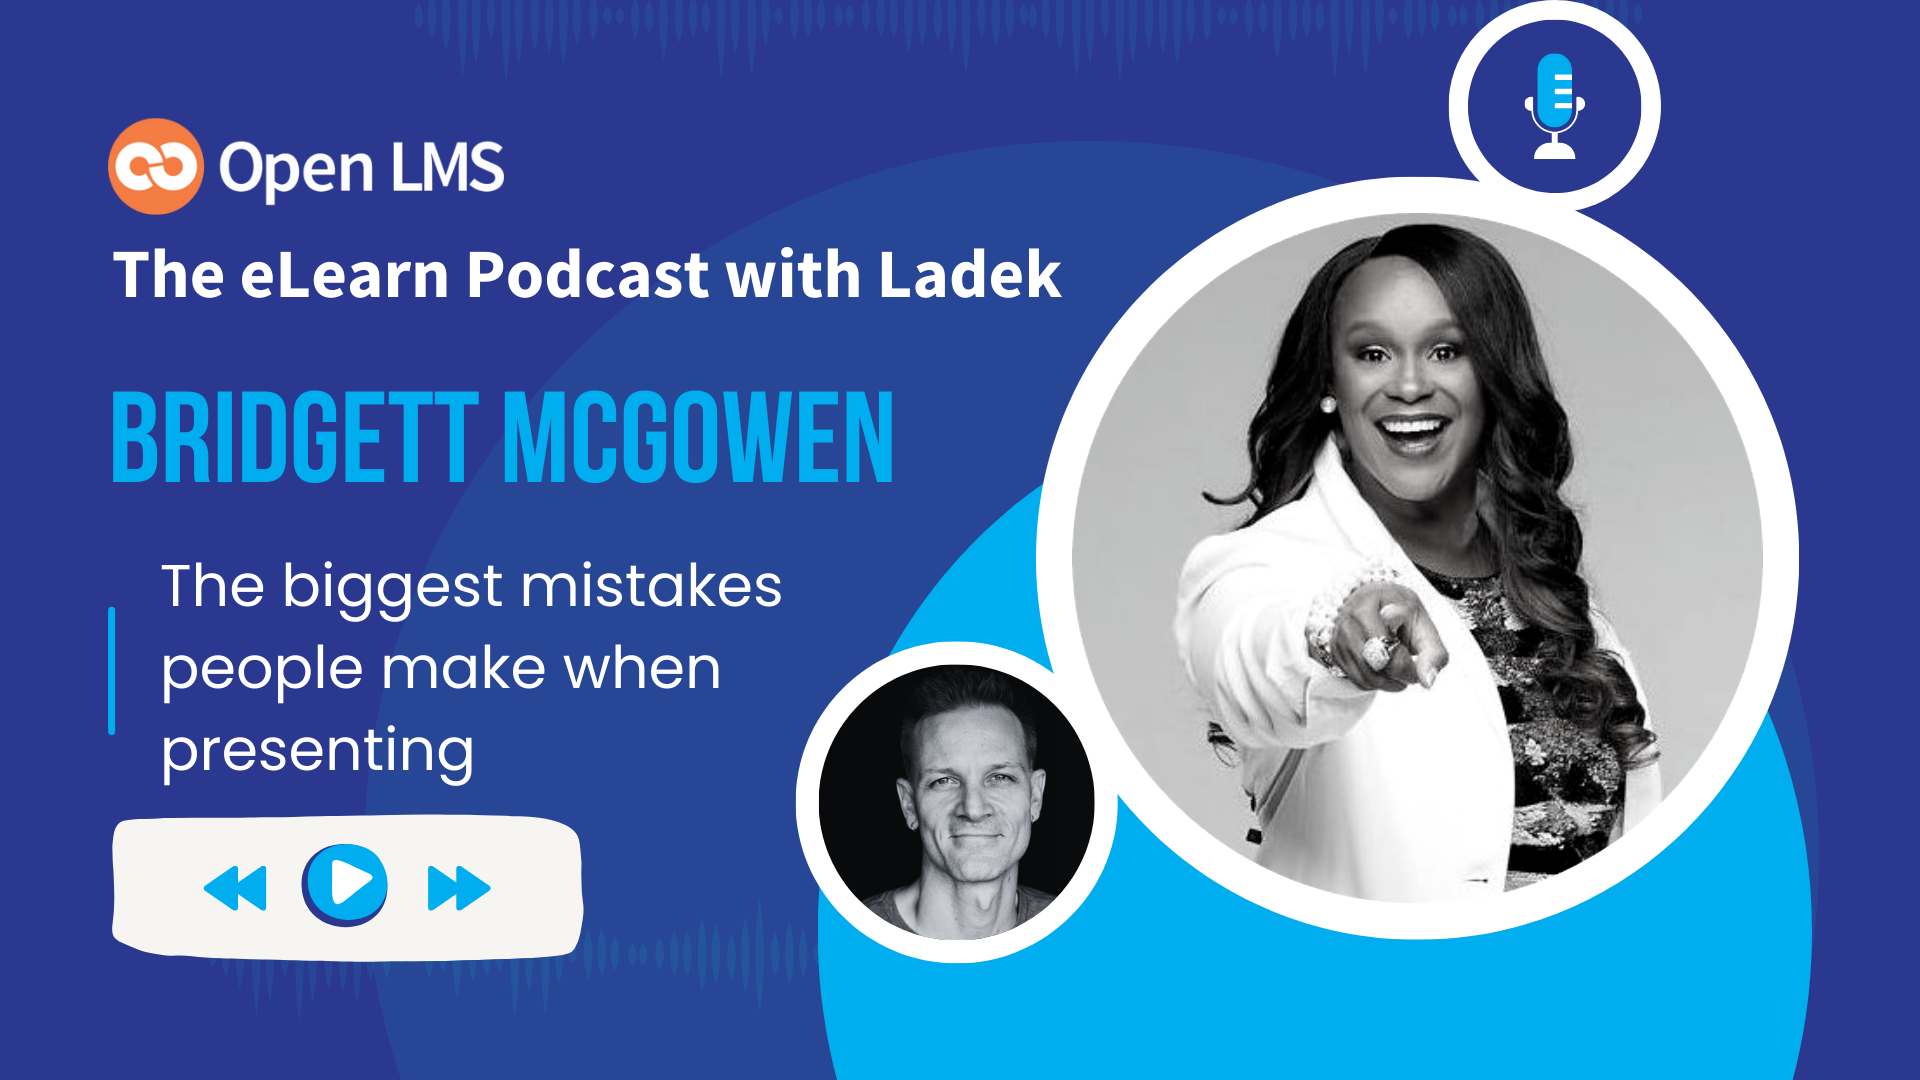 The Biggest Mistakes People Make When Presenting With Bridgett McGowen